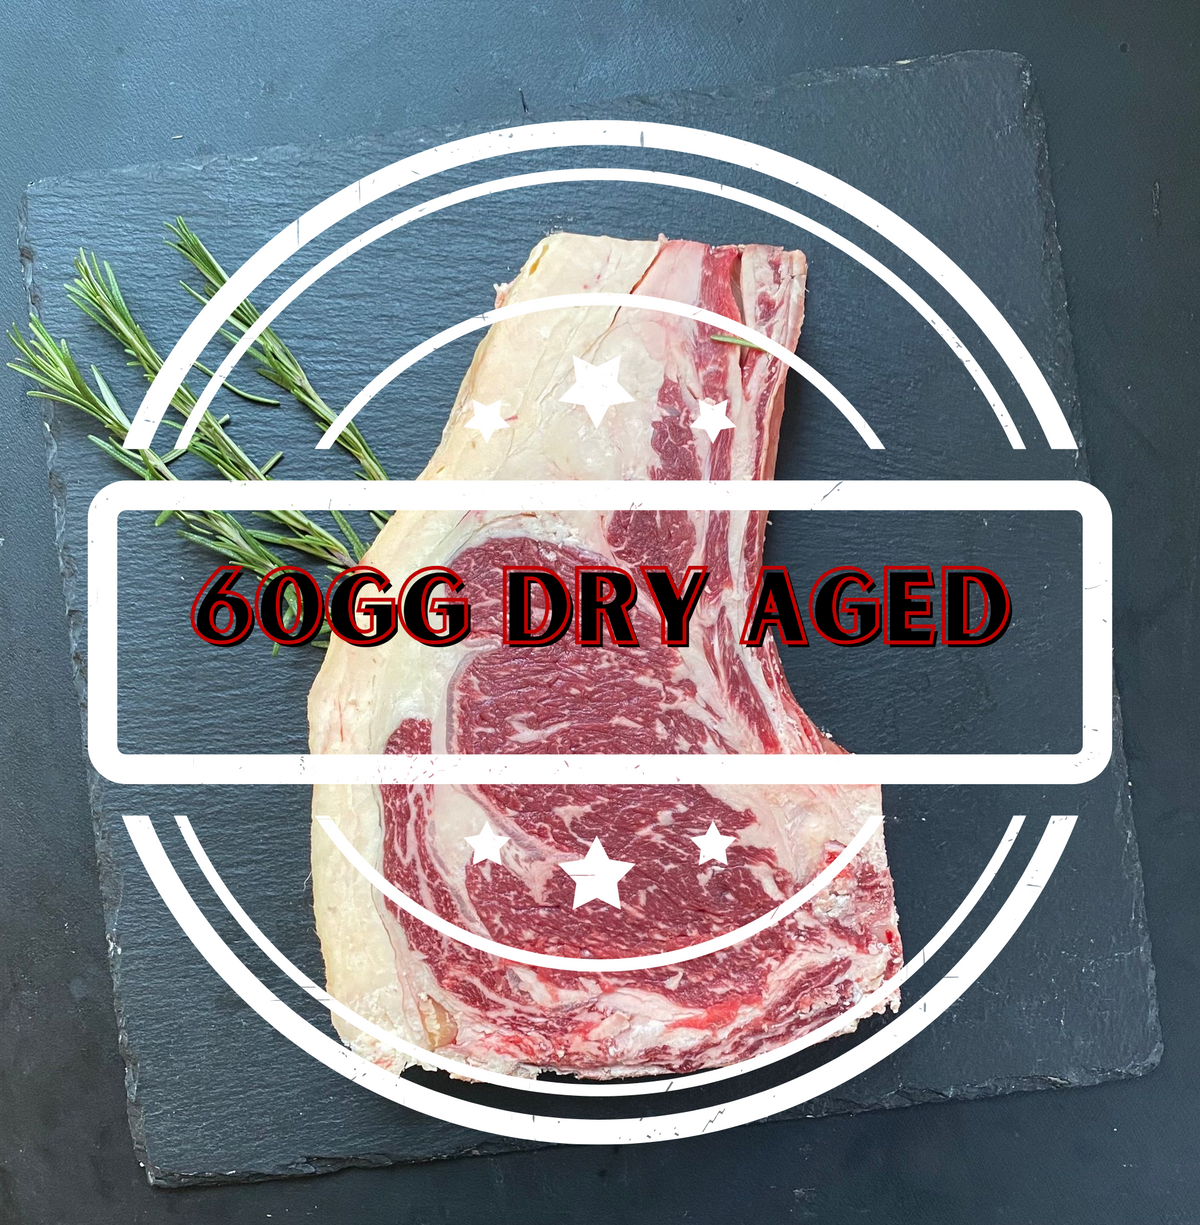 Costata Aberdeen Angus 60gg Dry Aged